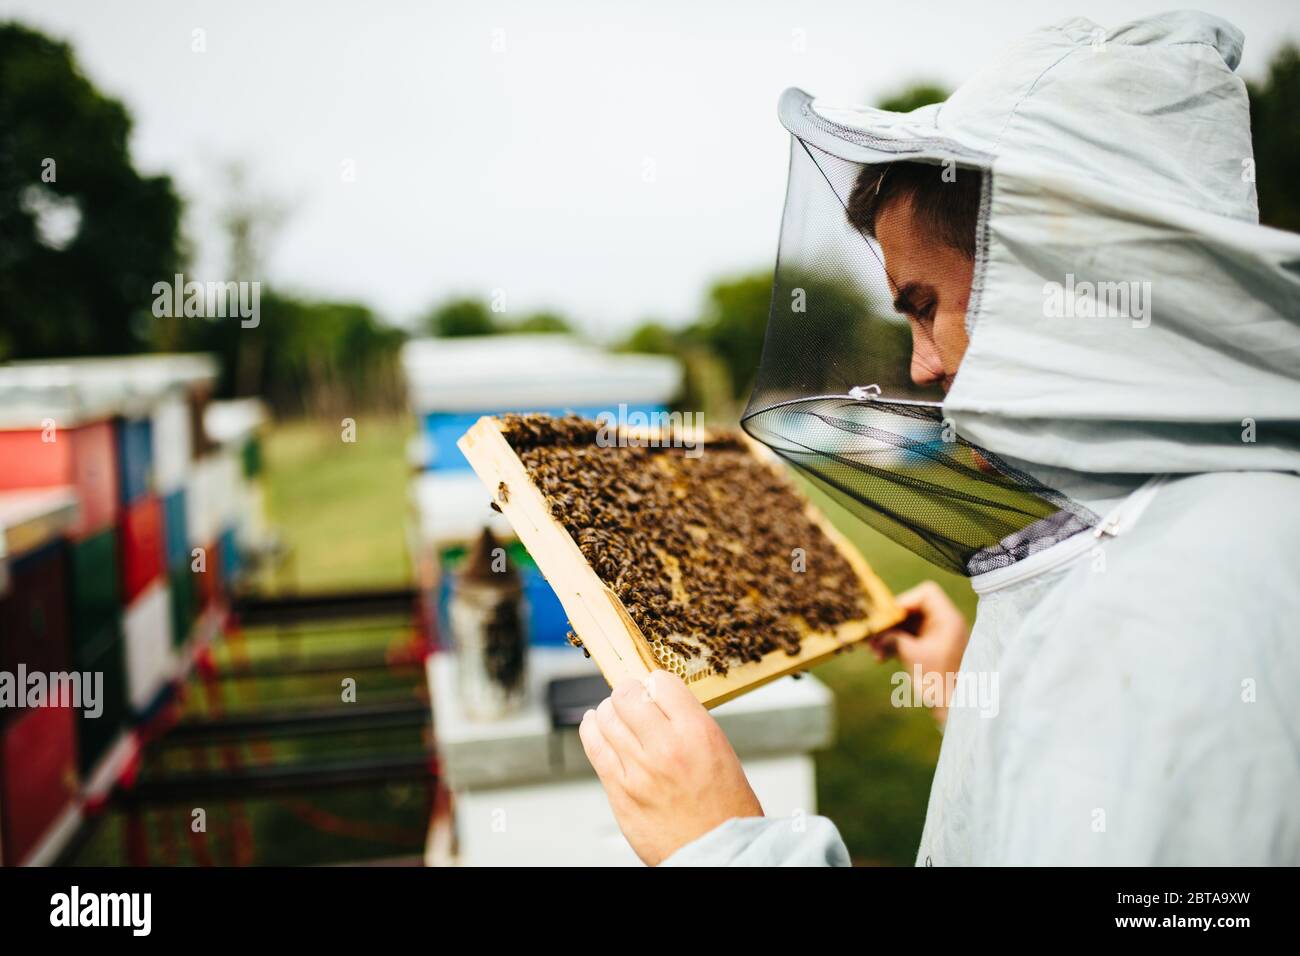 Detail inspecting of beehive frame with bees and honey on it Stock Photo